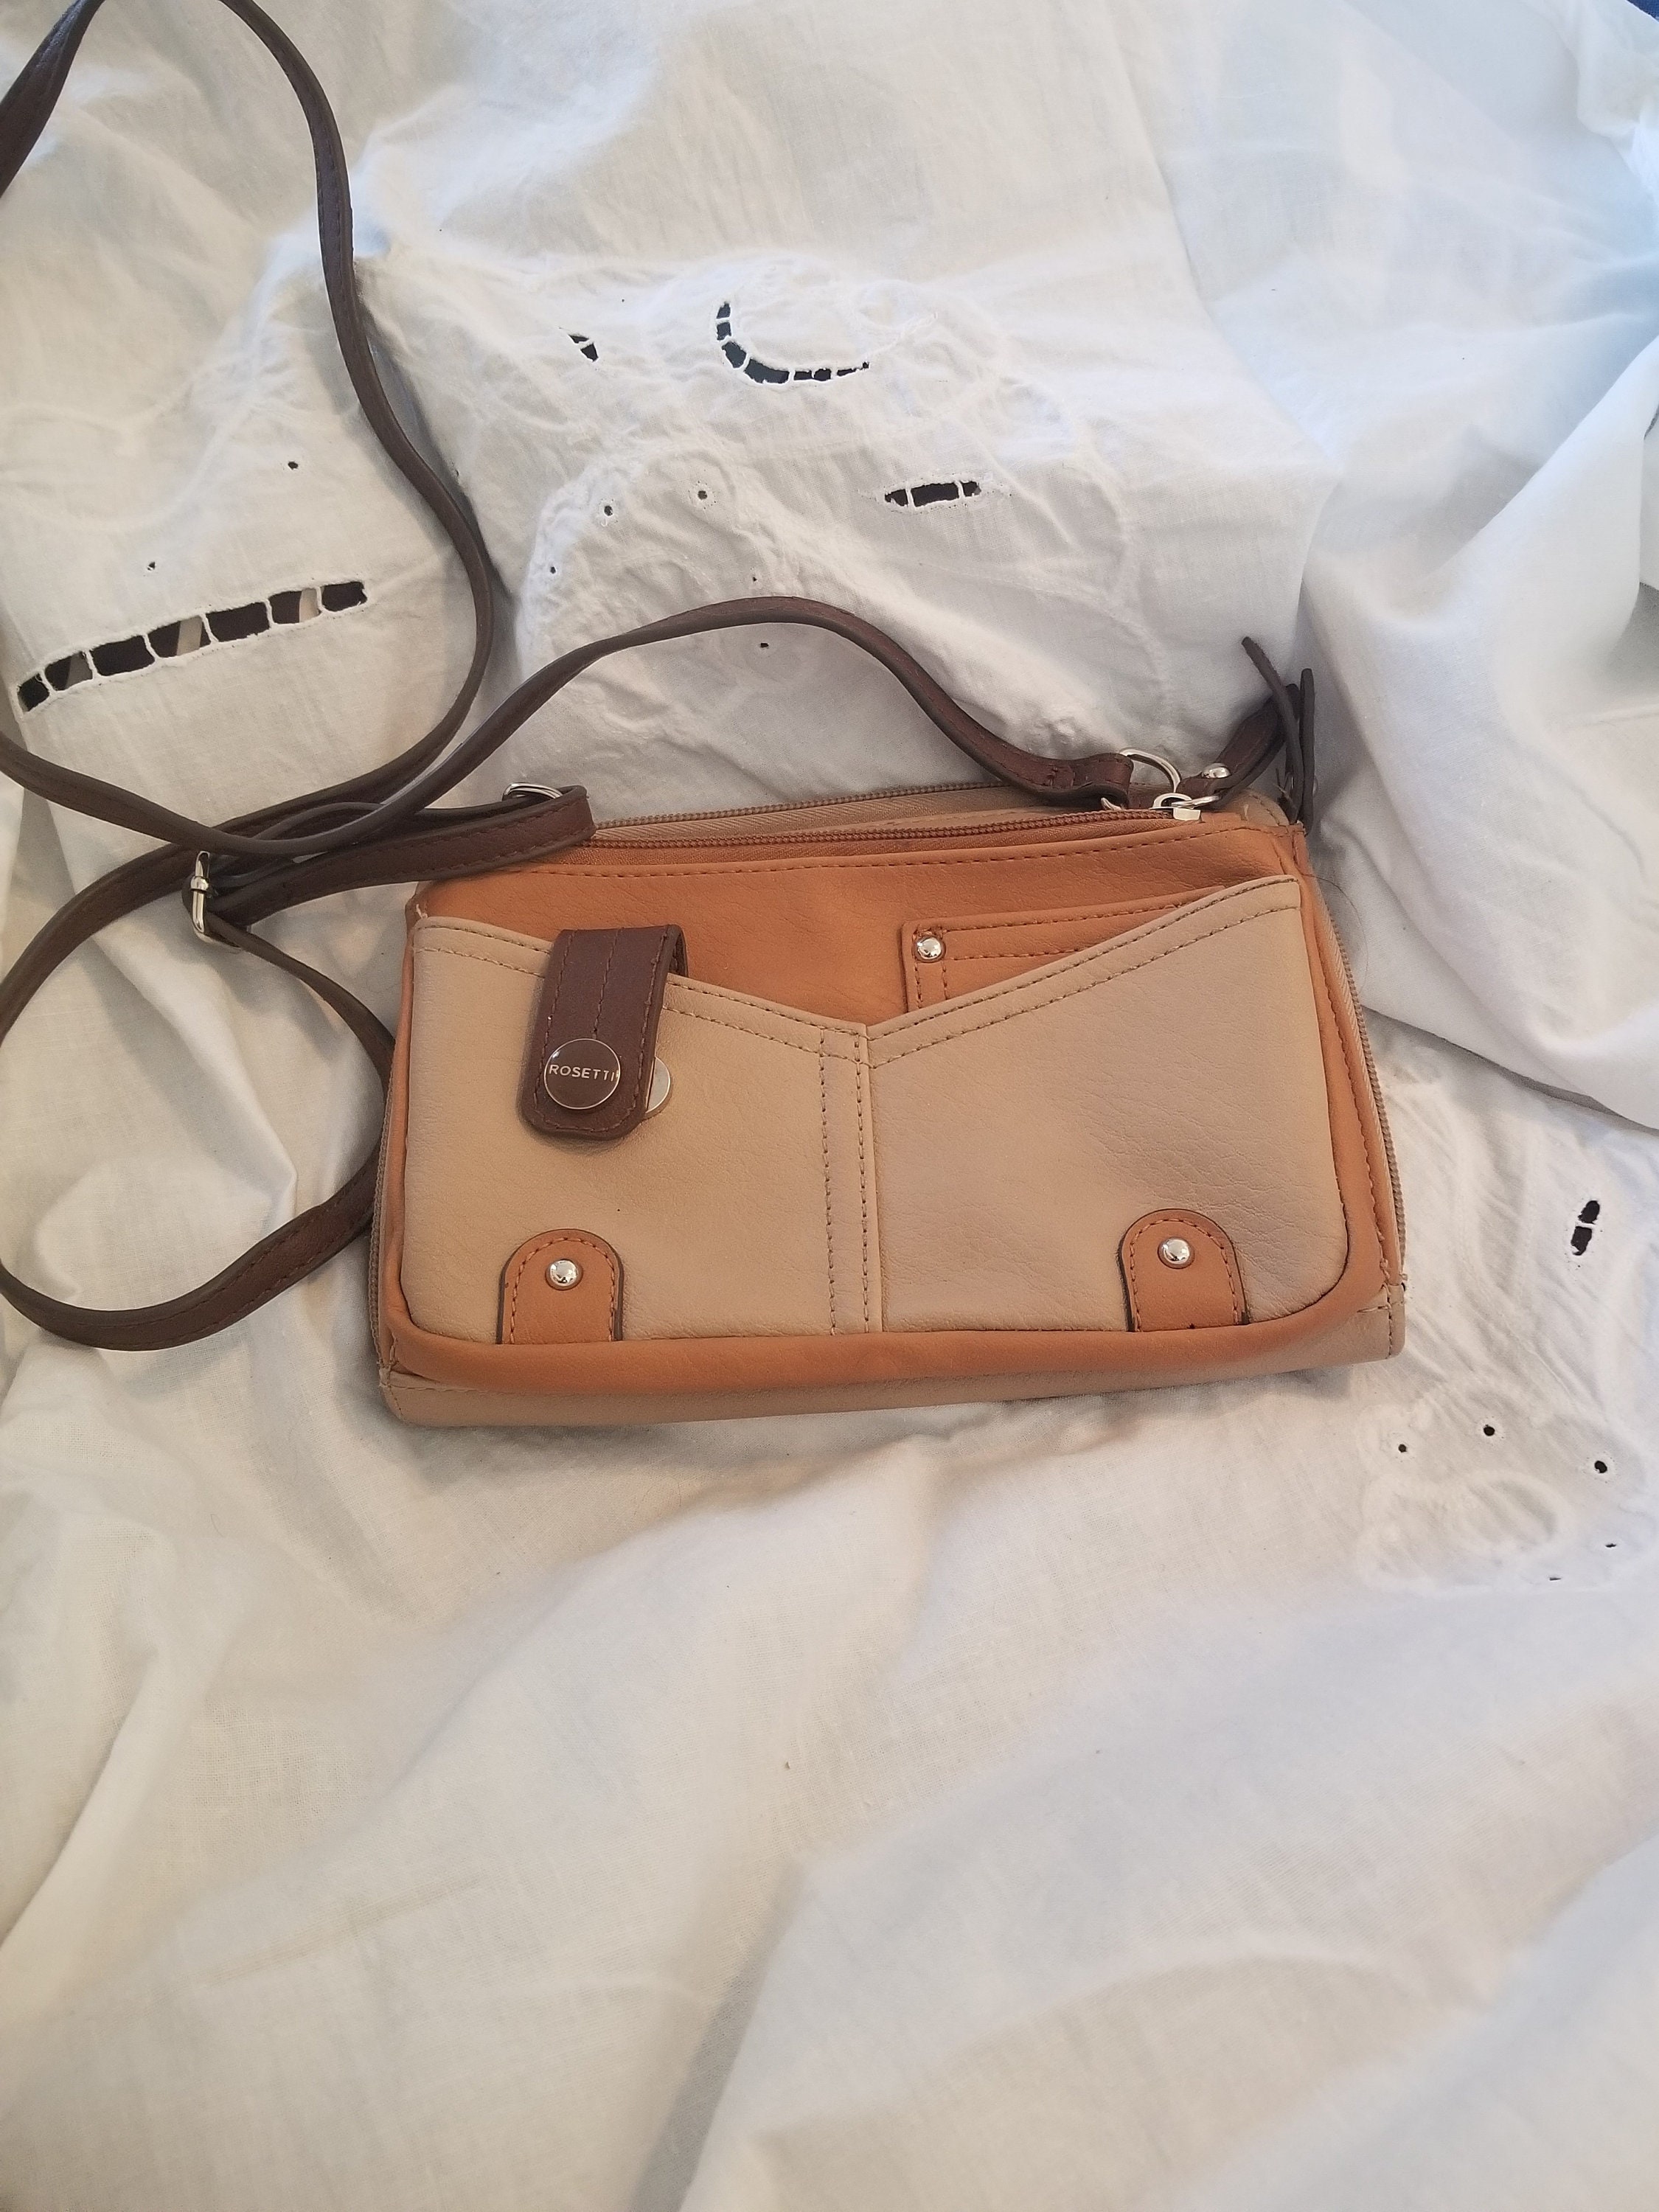 y2k rosetti woven purse with wooden handles sooo... - Depop